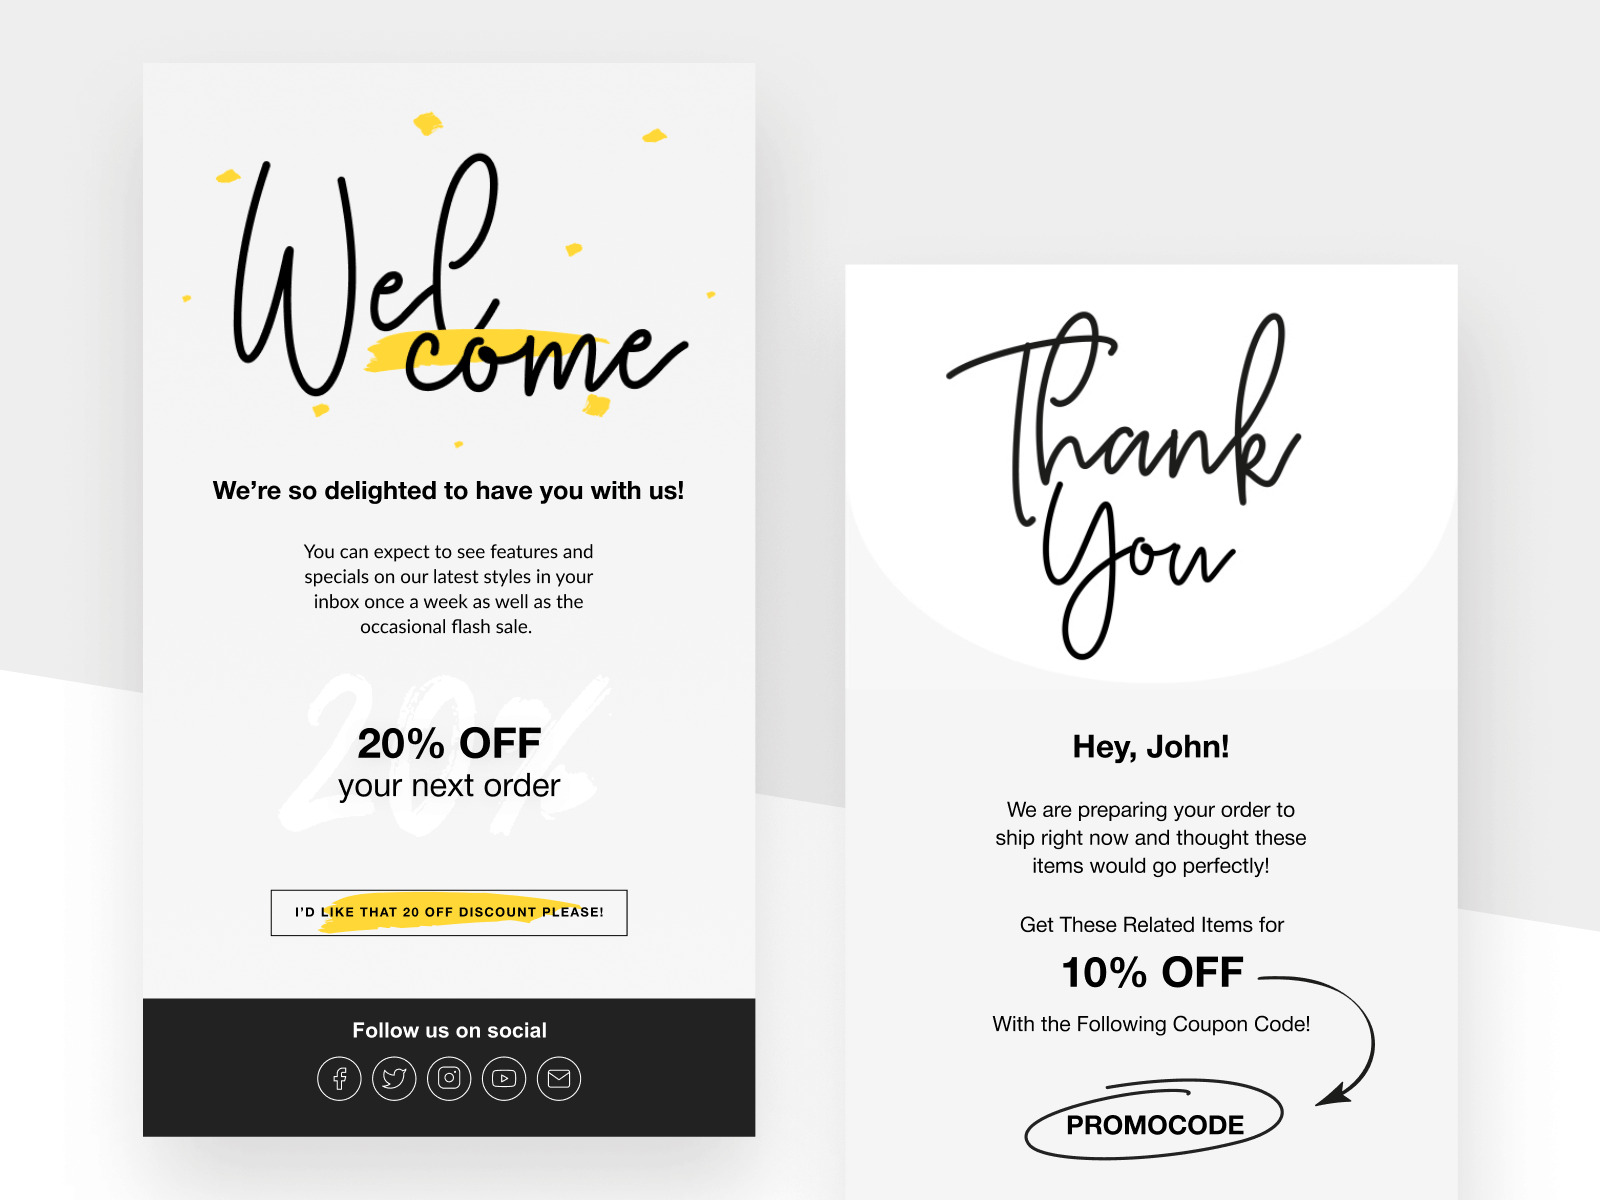 Email Marketing Design animation email design email marketing marketing design minimalism promotion thank you welcome